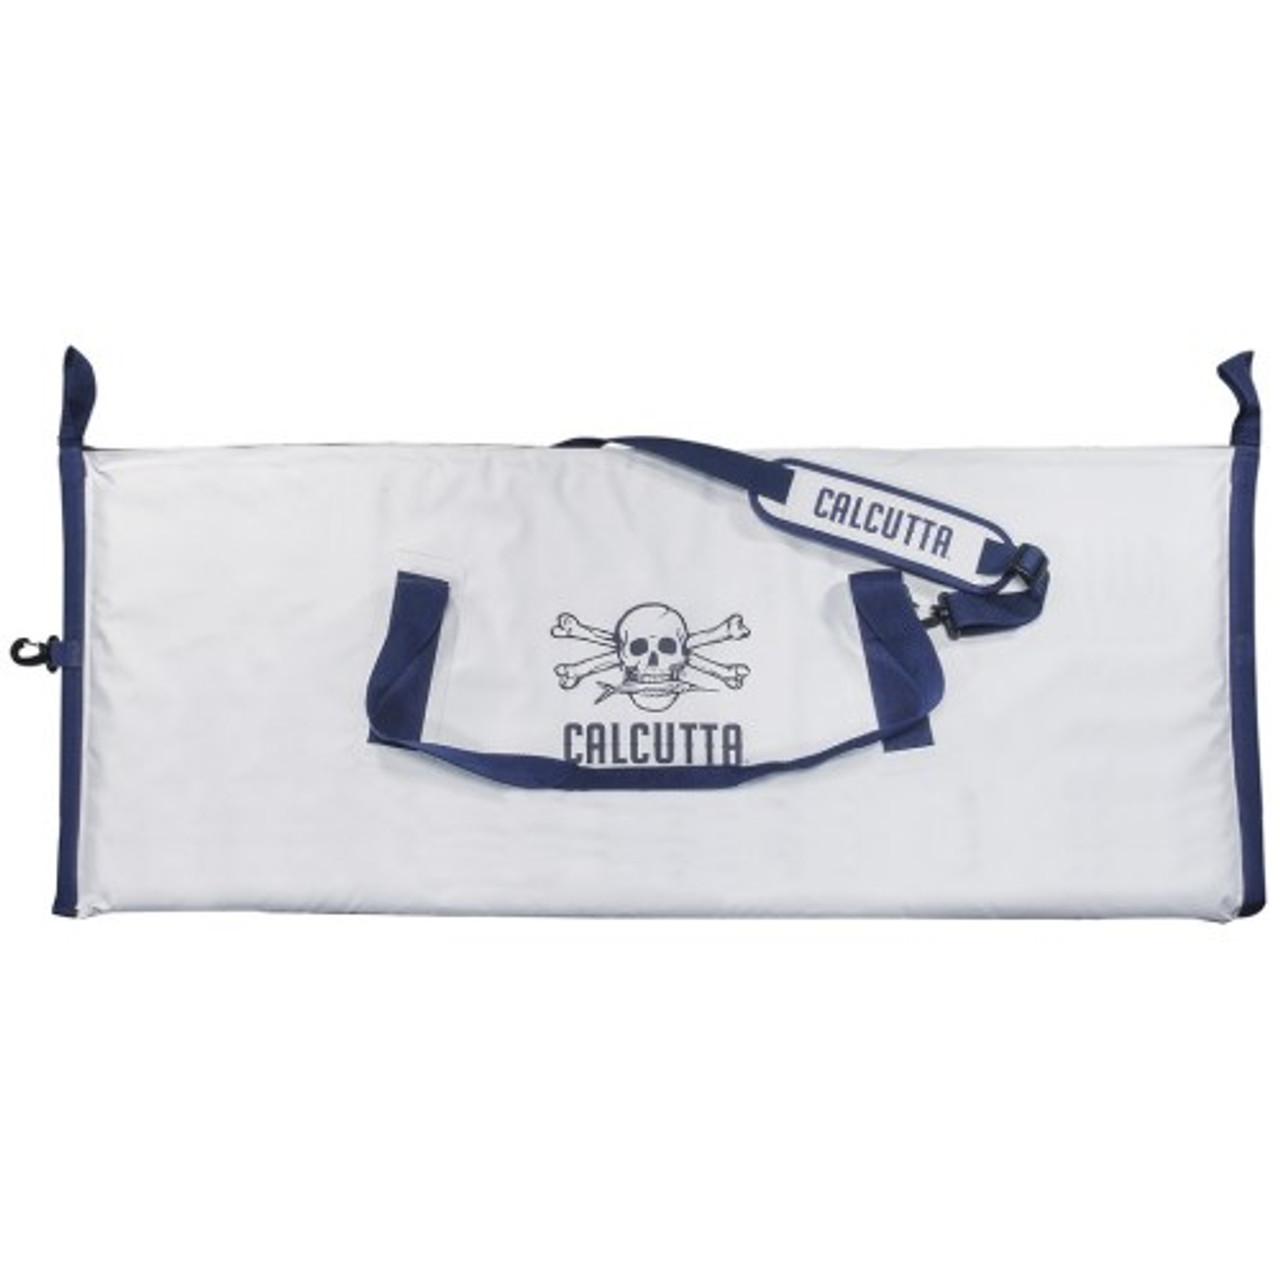 Calcutta Large Fish Cooler Bag - The Harbour Chandler